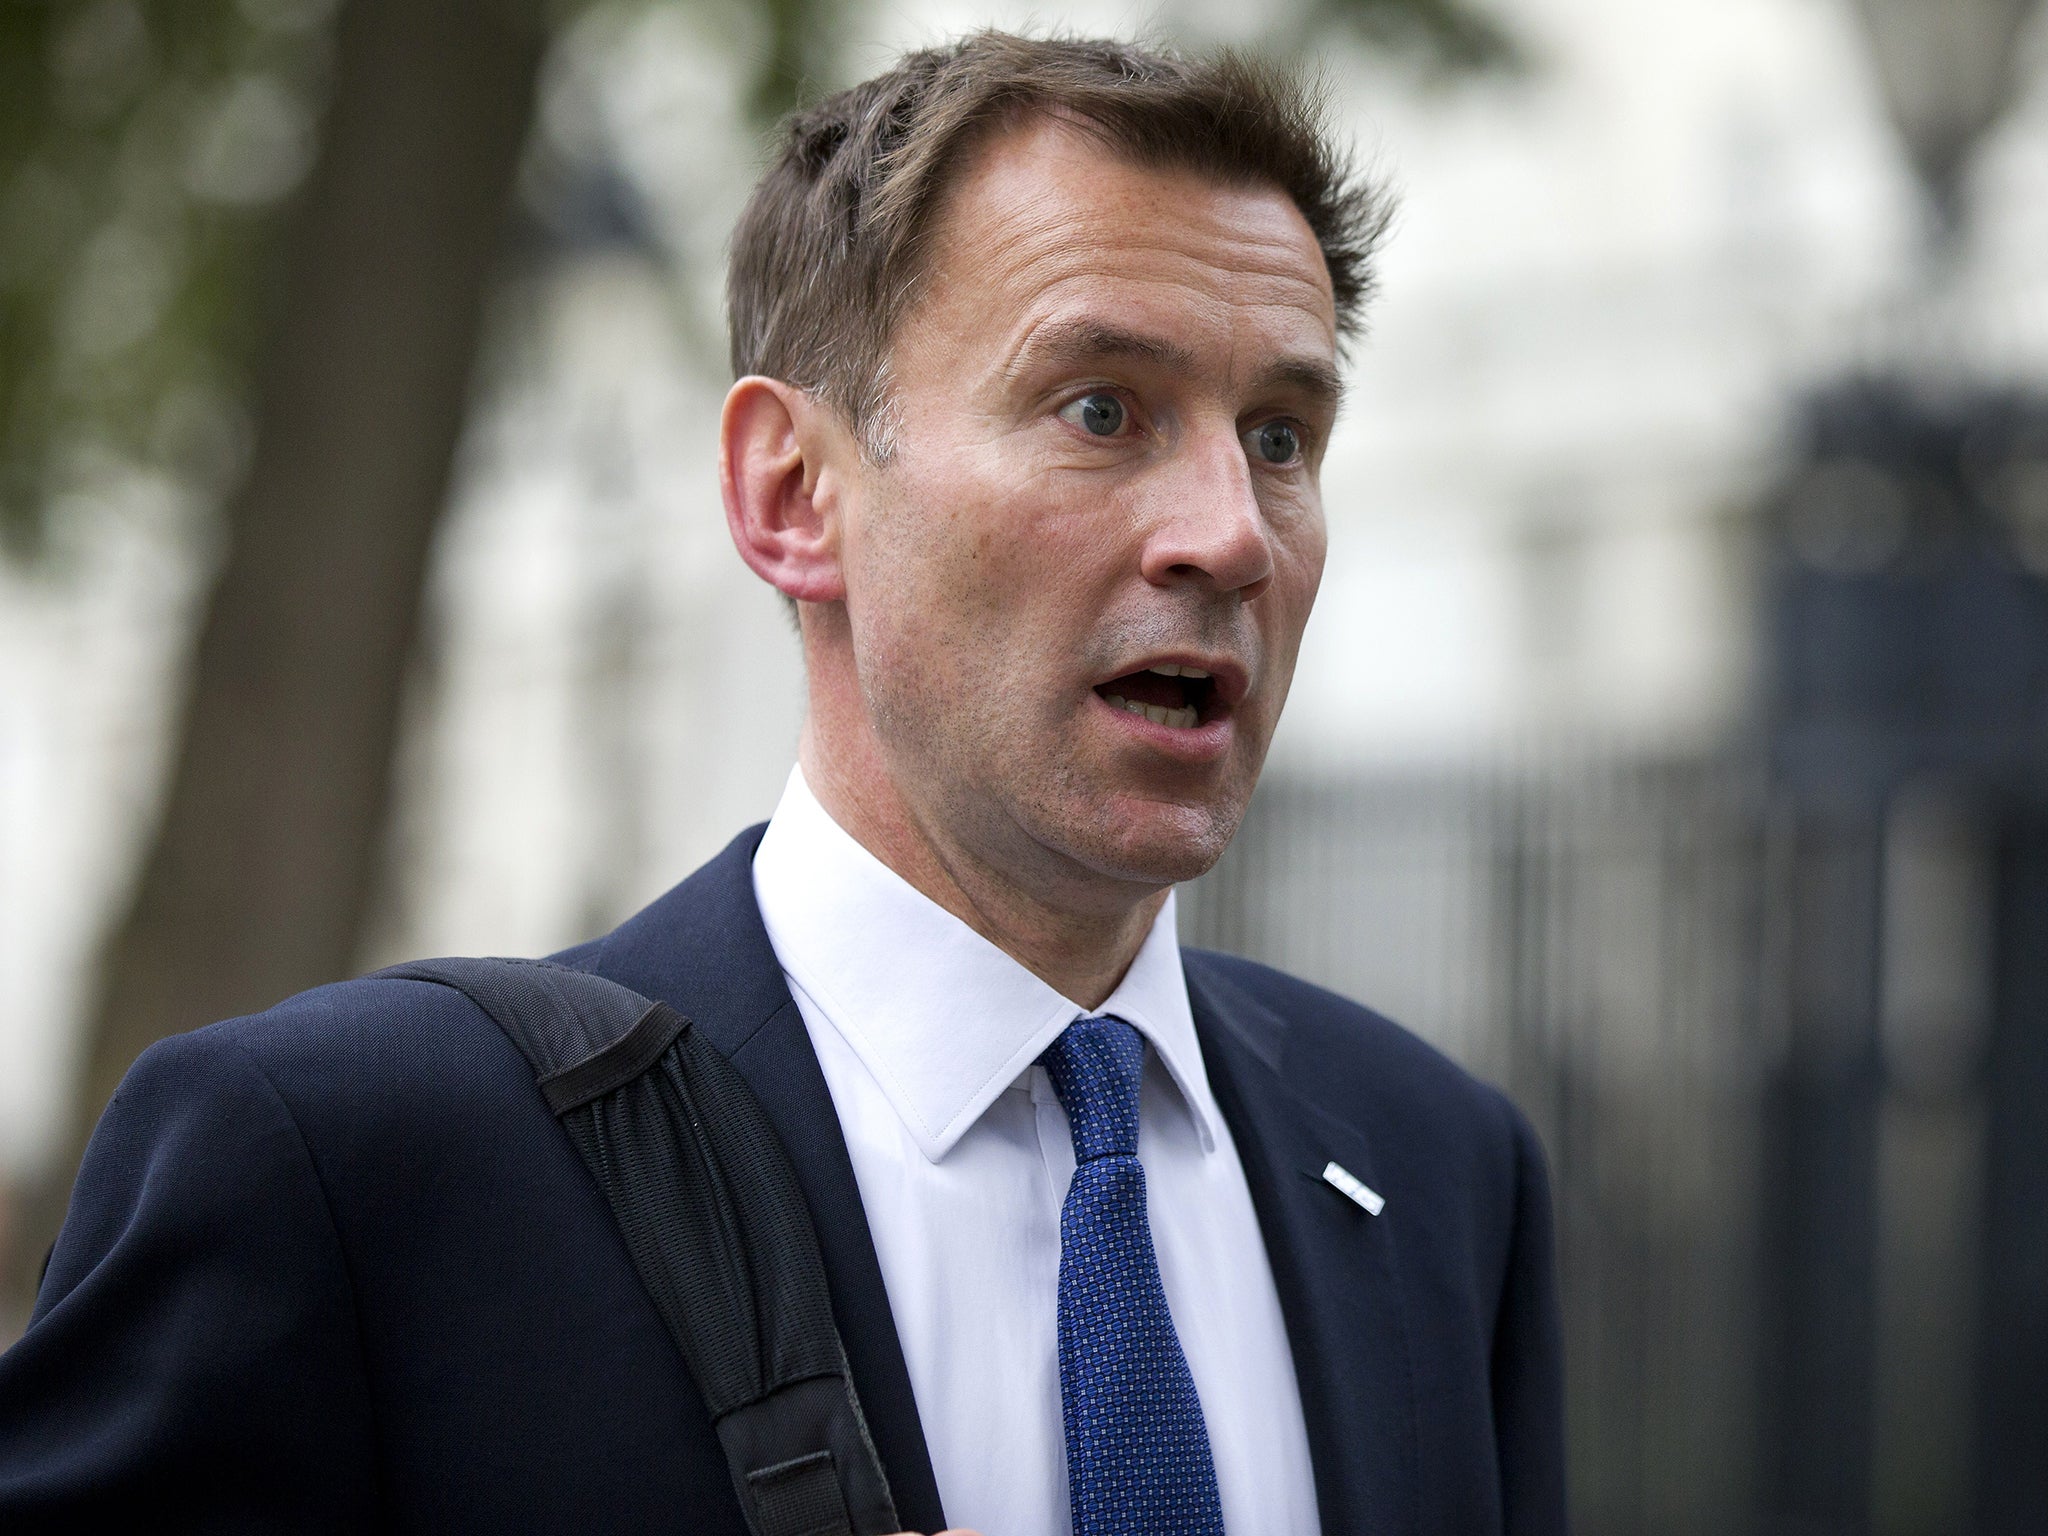 Mr Hunt has has been widely criticised by doctors